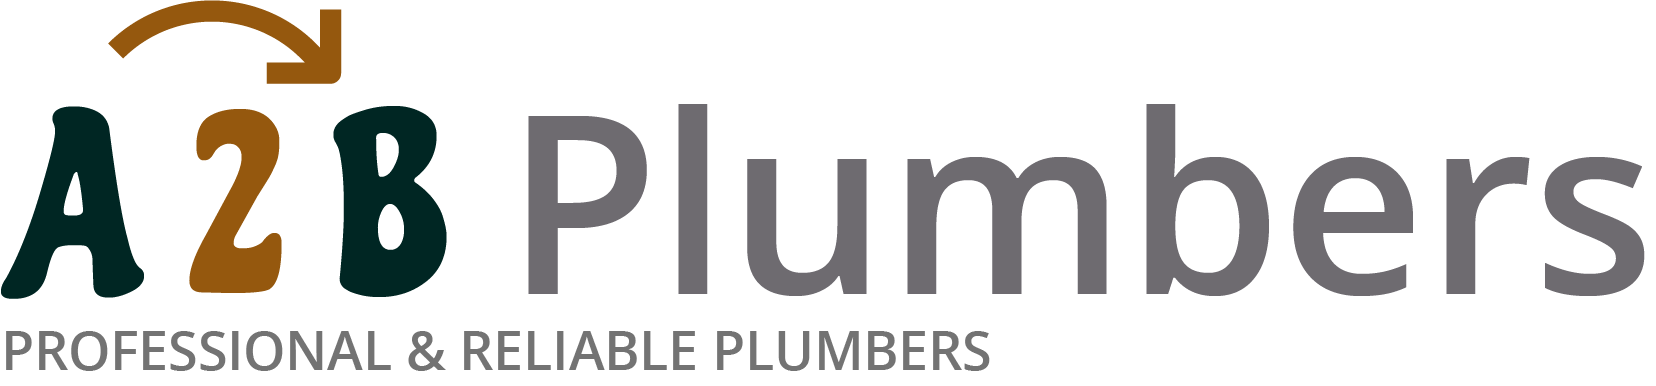 If you need a boiler installed, a radiator repaired or a leaking tap fixed, call us now - we provide services for properties in Chipping Sodbury and the local area.